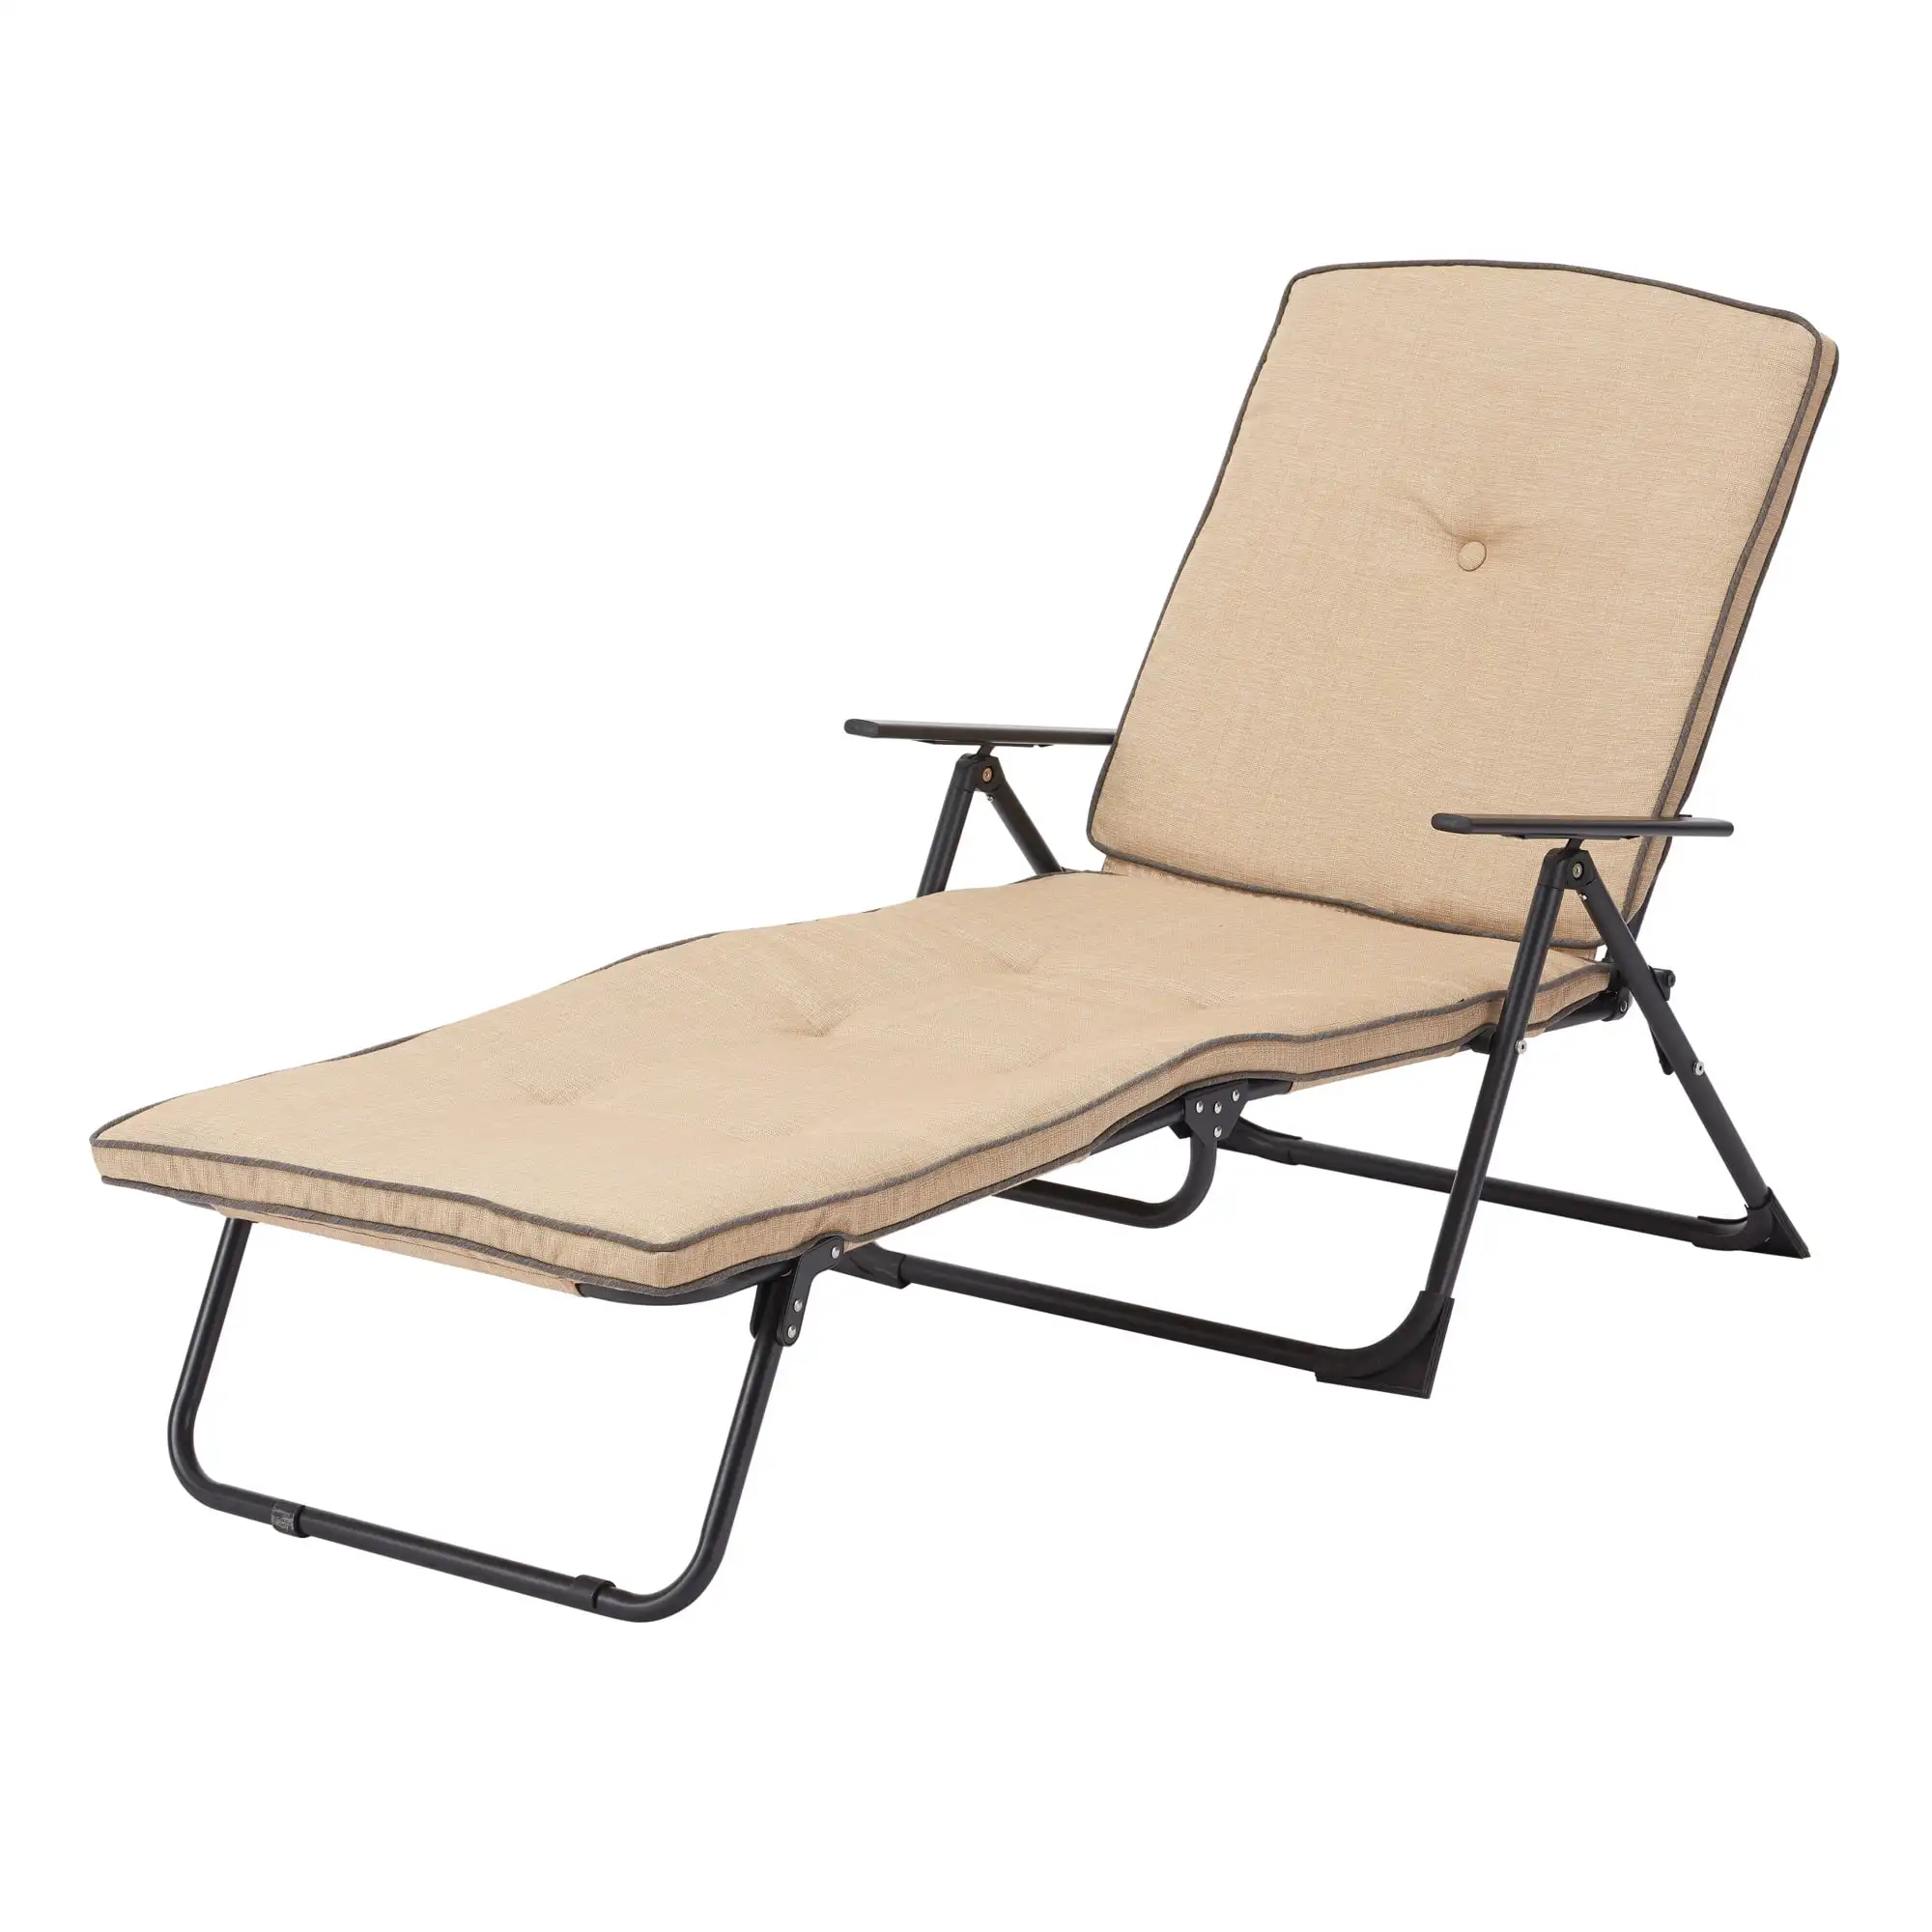 

Mainstays Sand Dune Foldable Steel Outdoor Chaise Lounge, Beige/Black